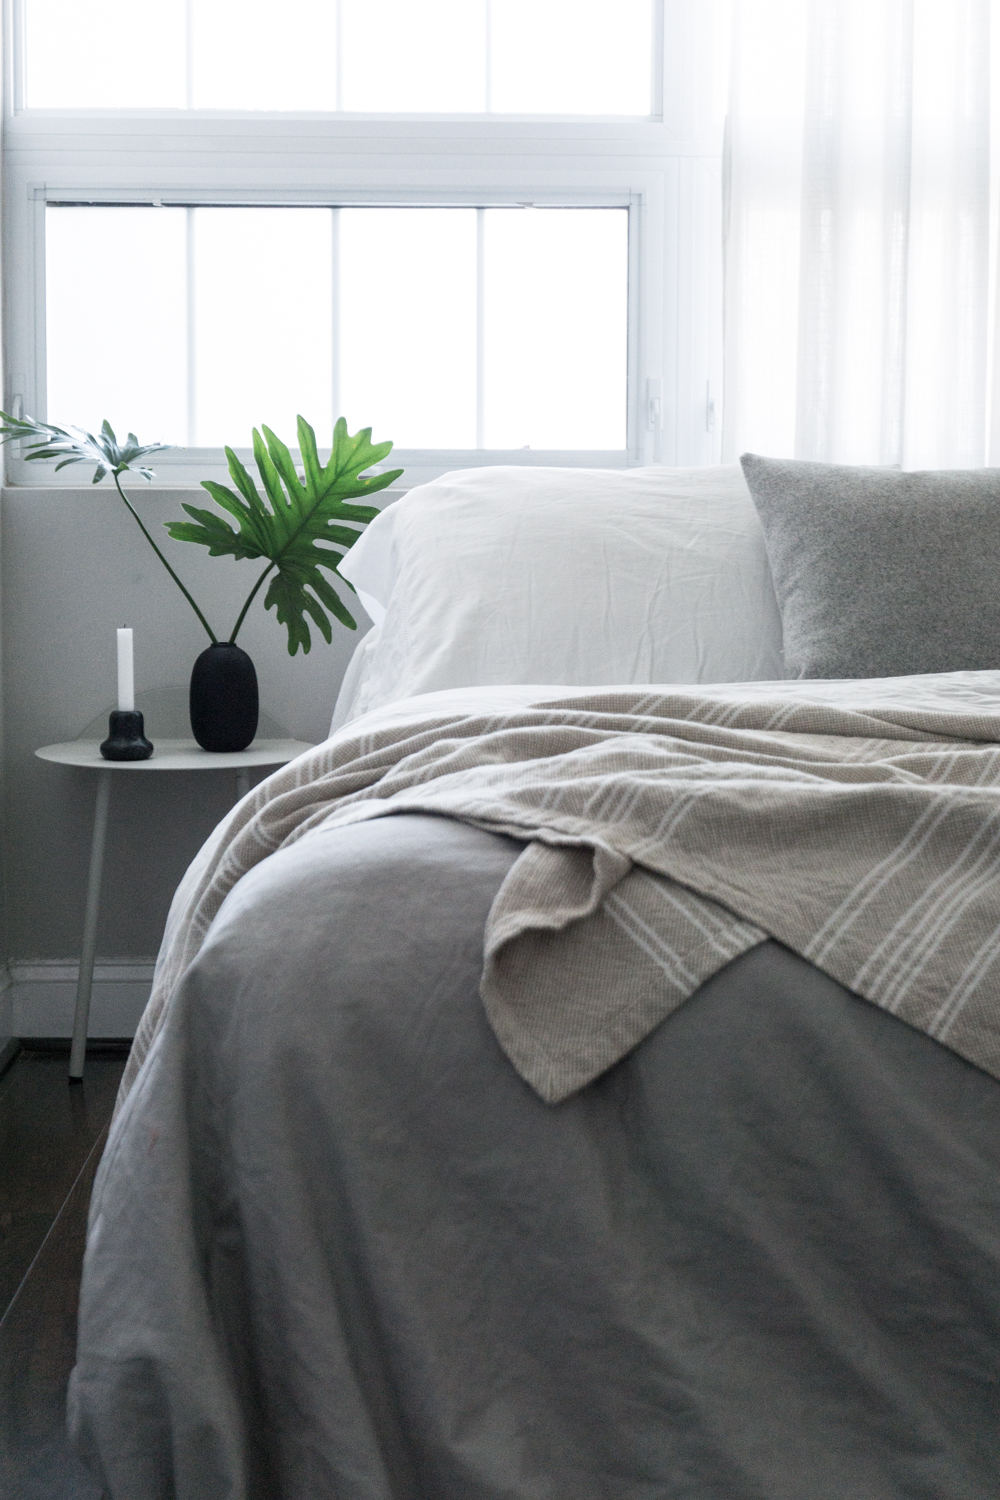 calm bedroom details minimalist home interior style rgdaily blog